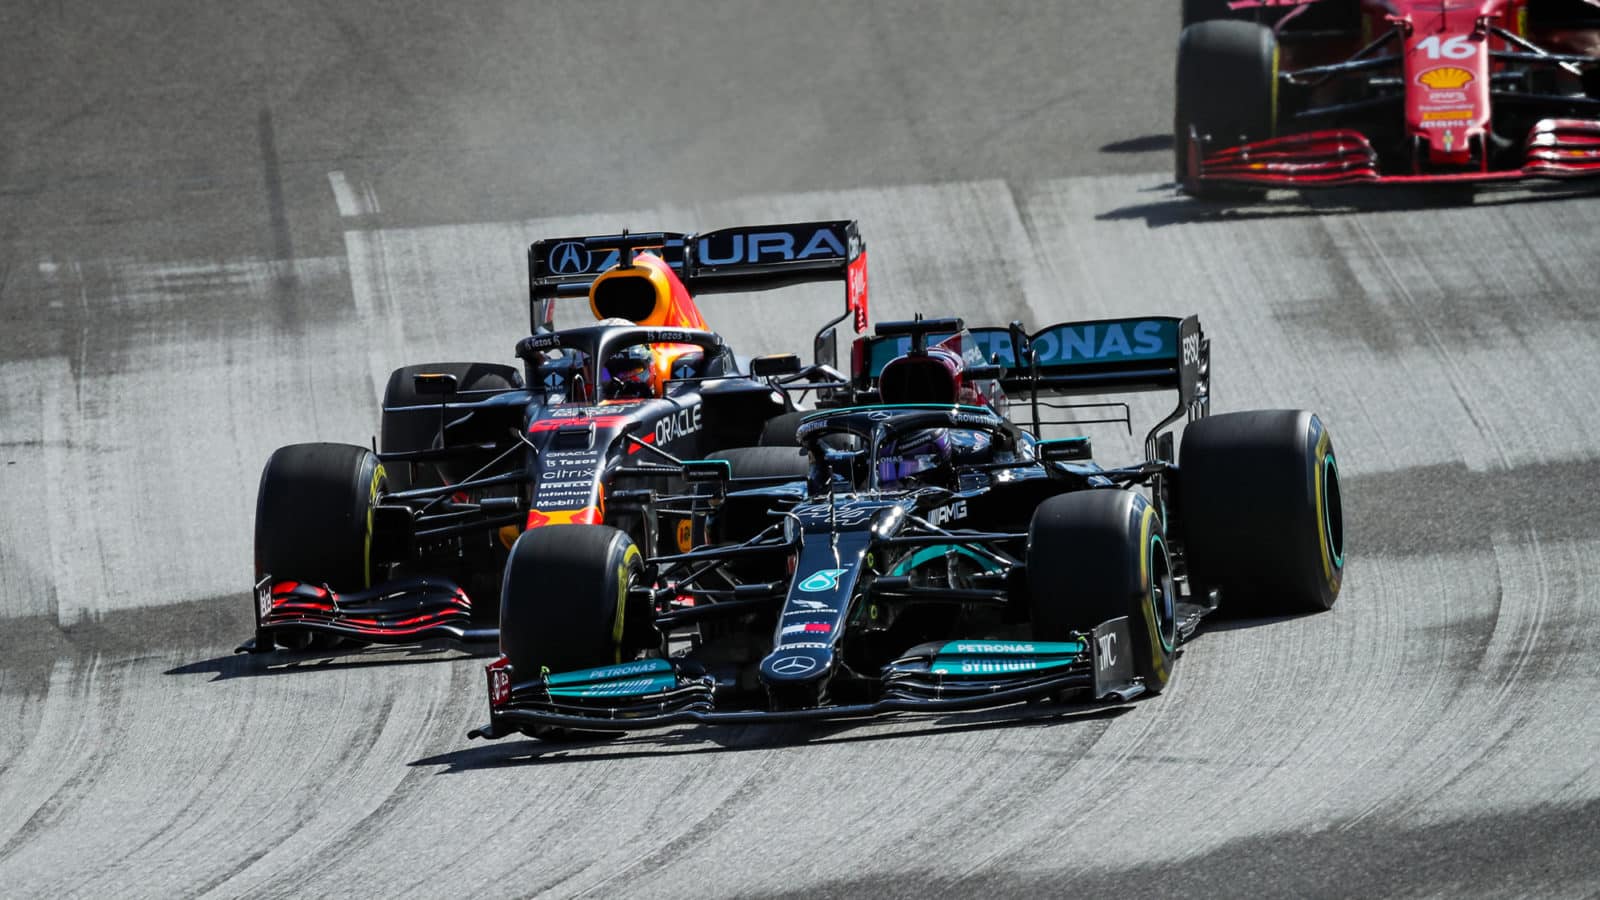 Max Verstappen and Lewis Hamilton fight for the lead of the 2021 US Grand Prix